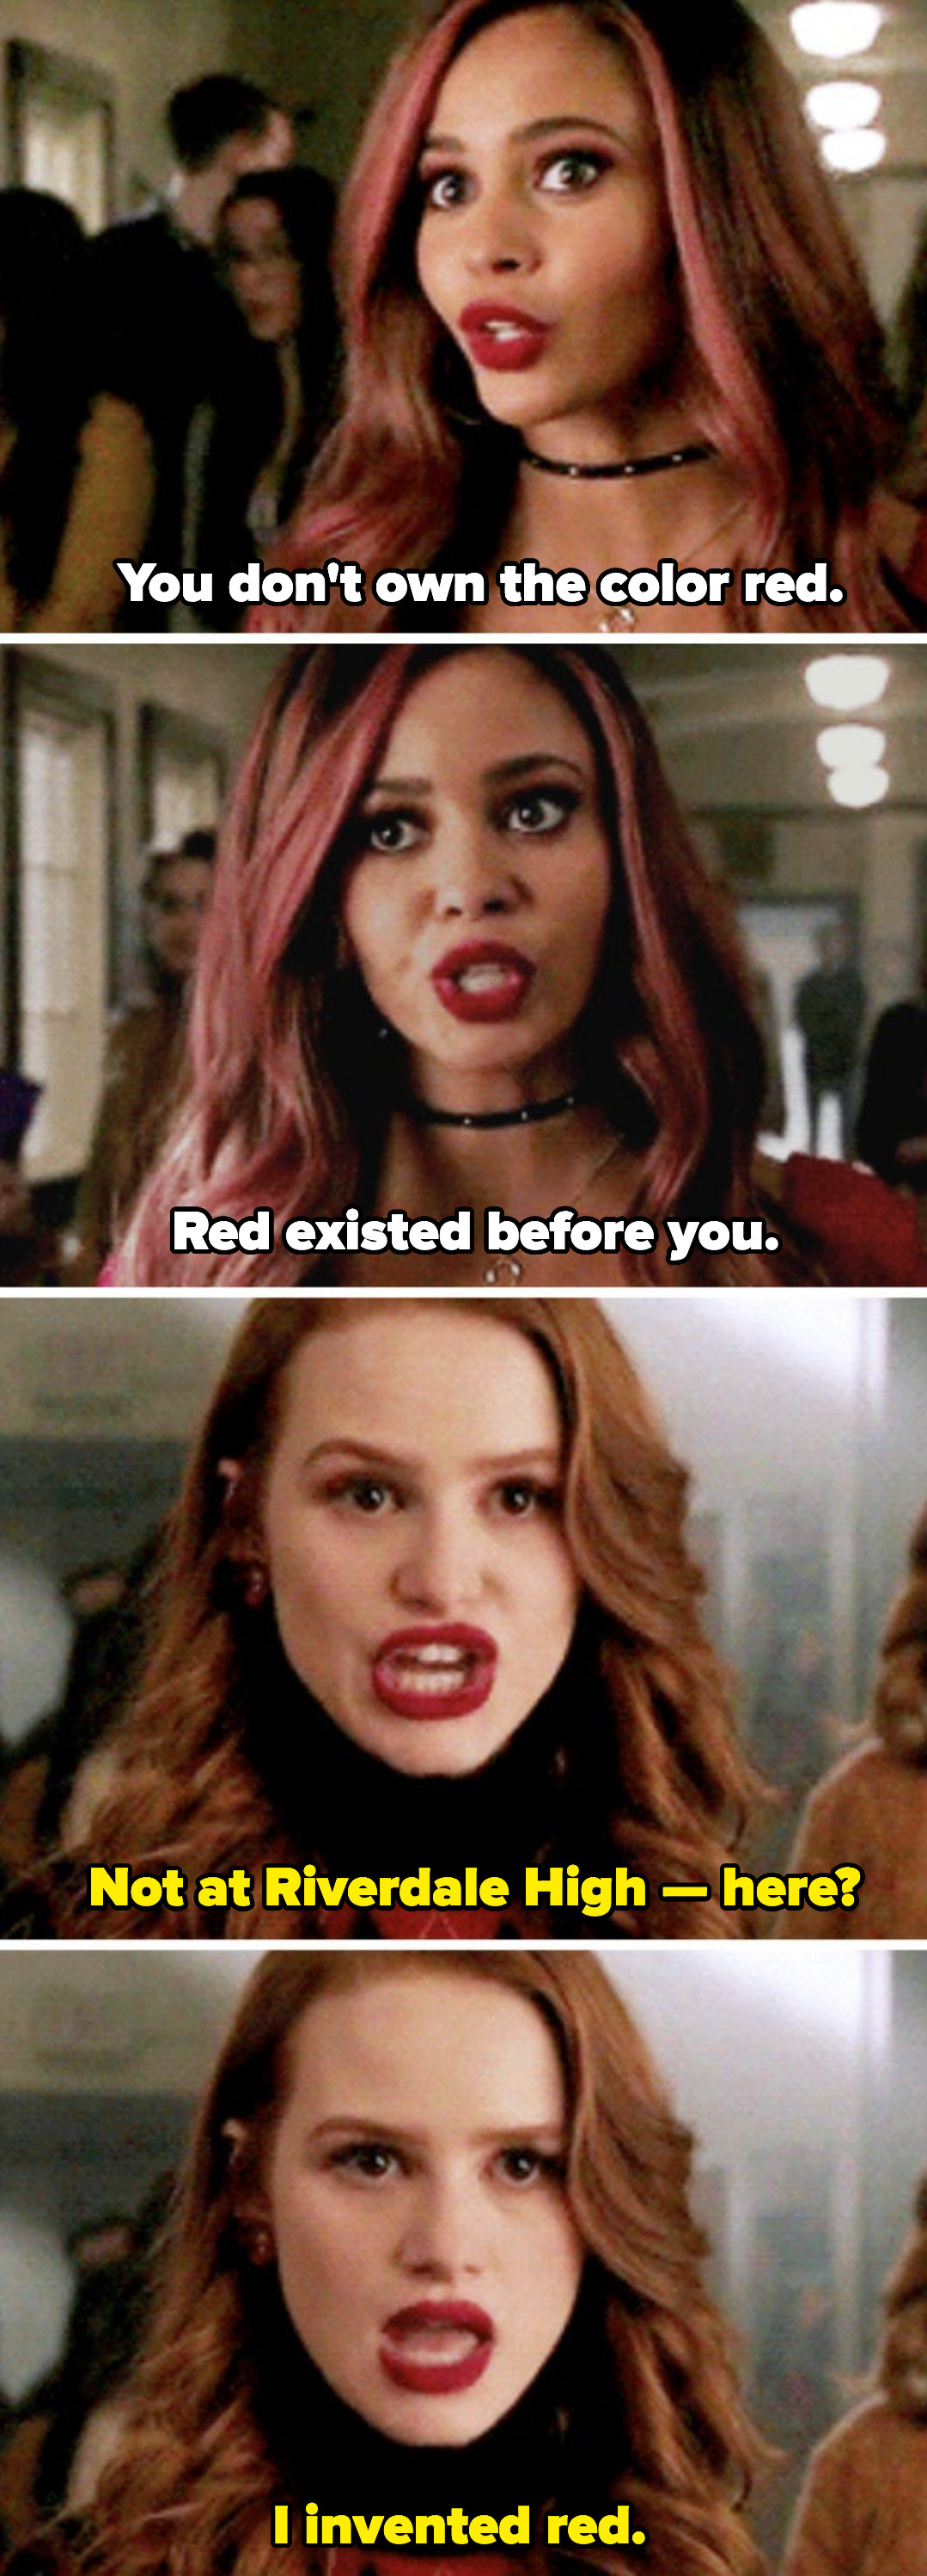 Toni and Cheryl arguing in the school hallway who invented the color red